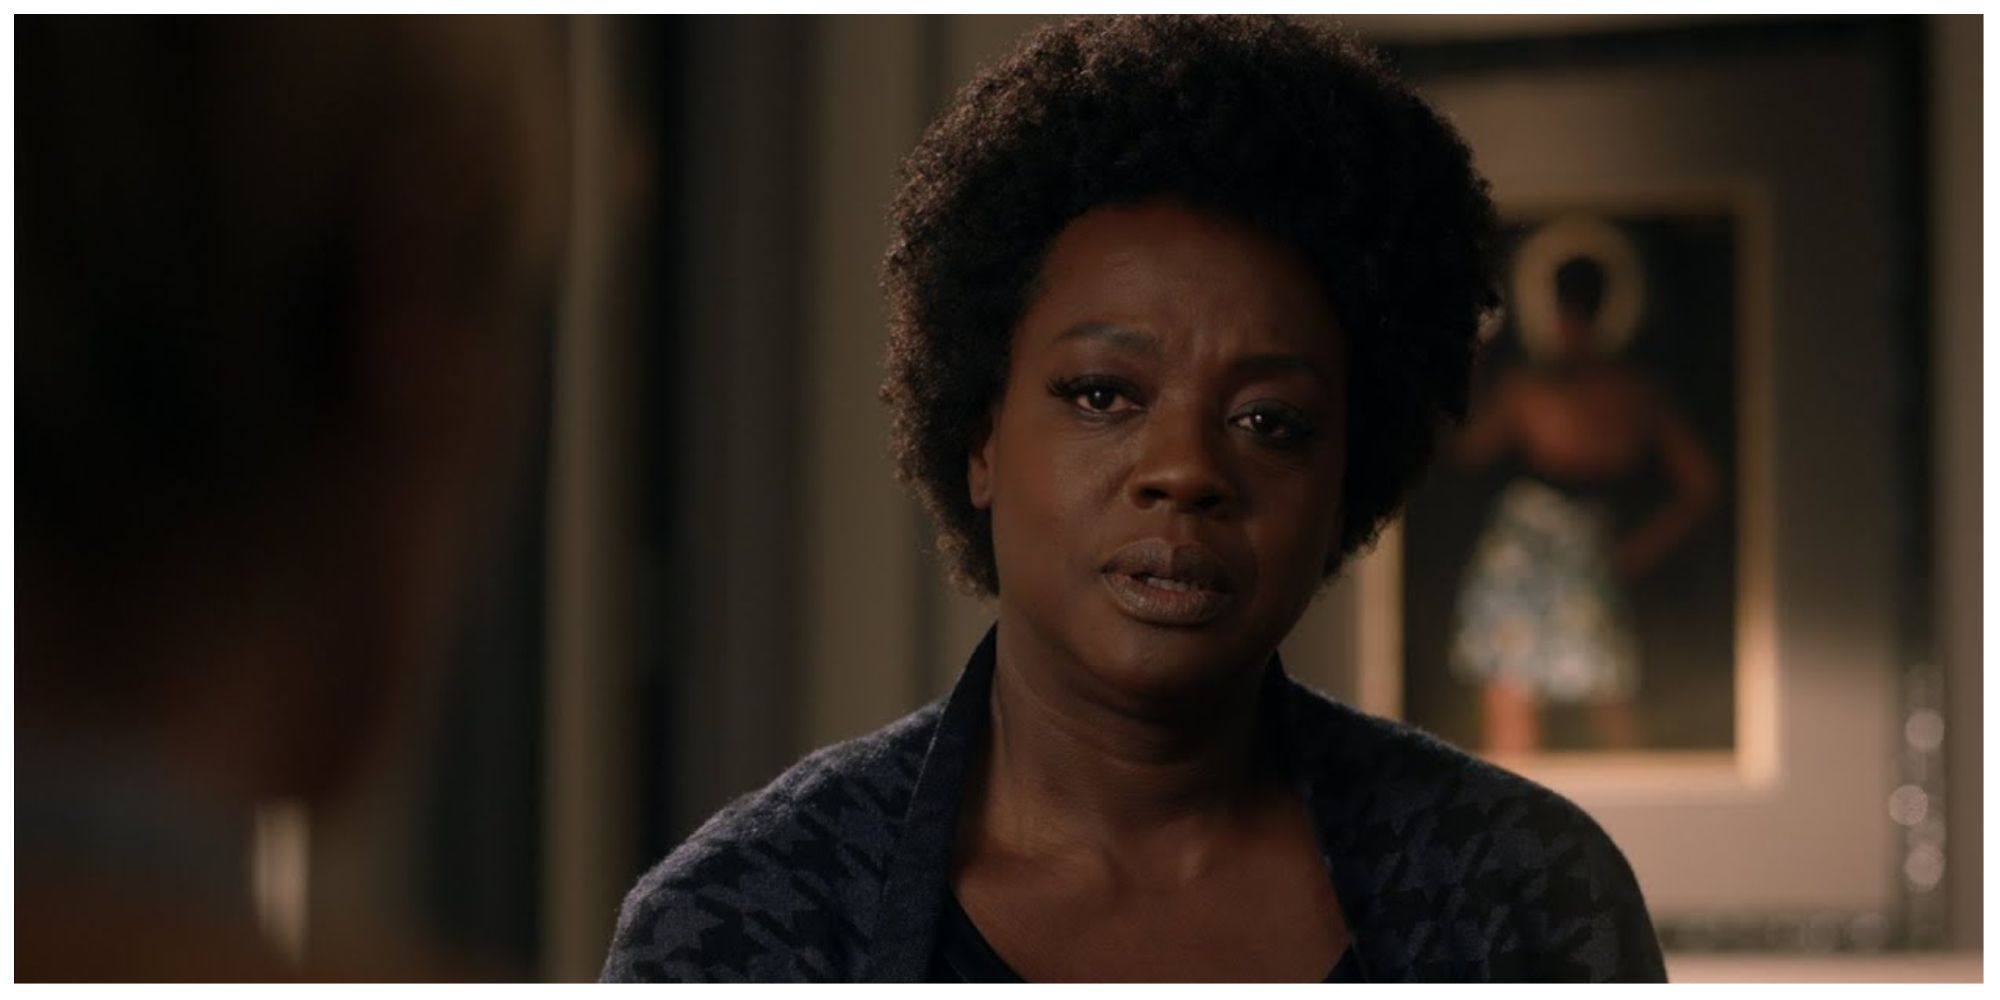 Annalise speaking with someone offscreen whilst looking concerned and stressed